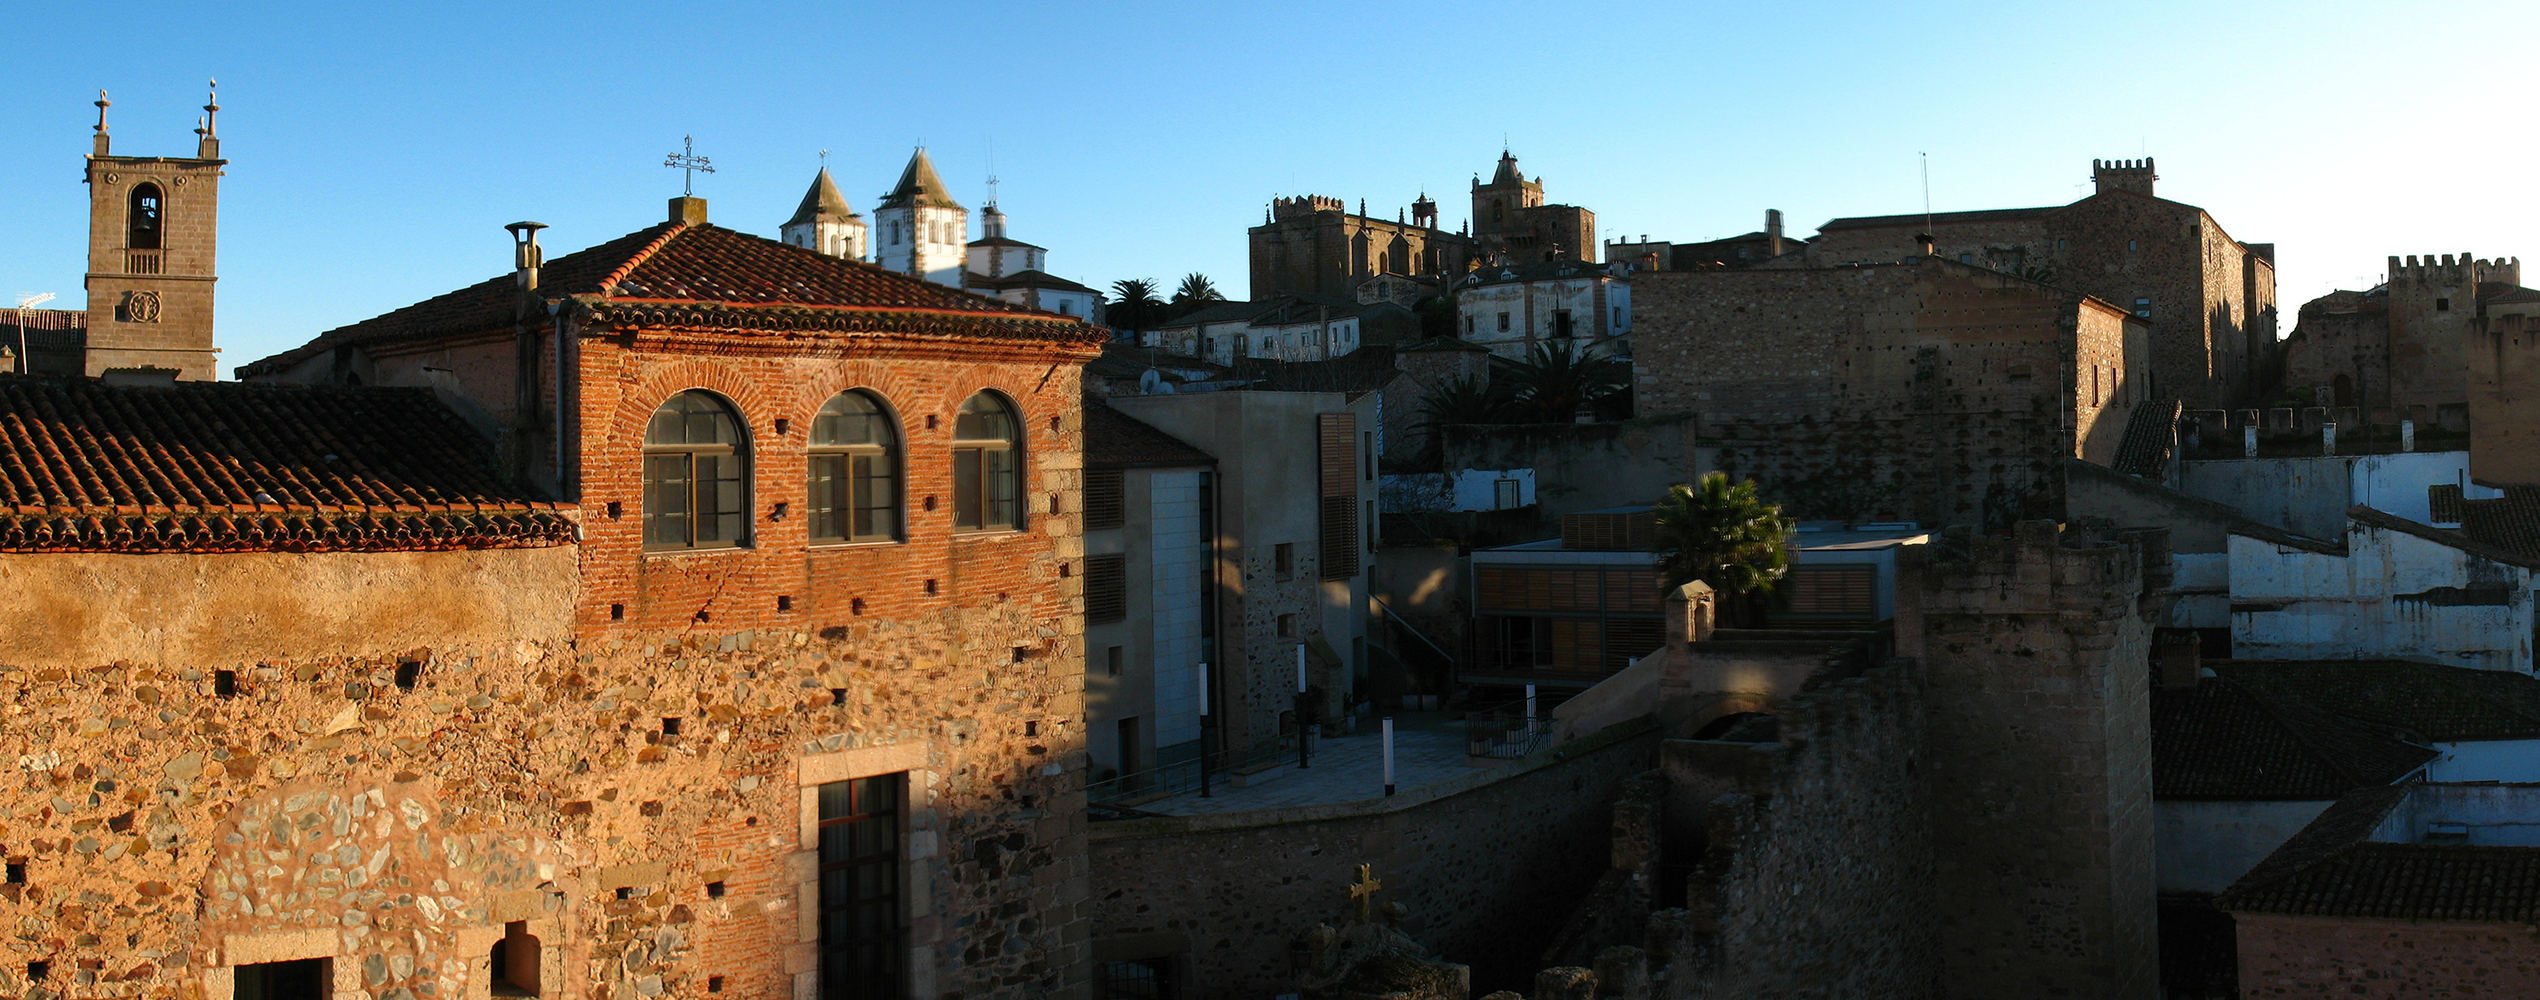 A view of some buildings and a castle.